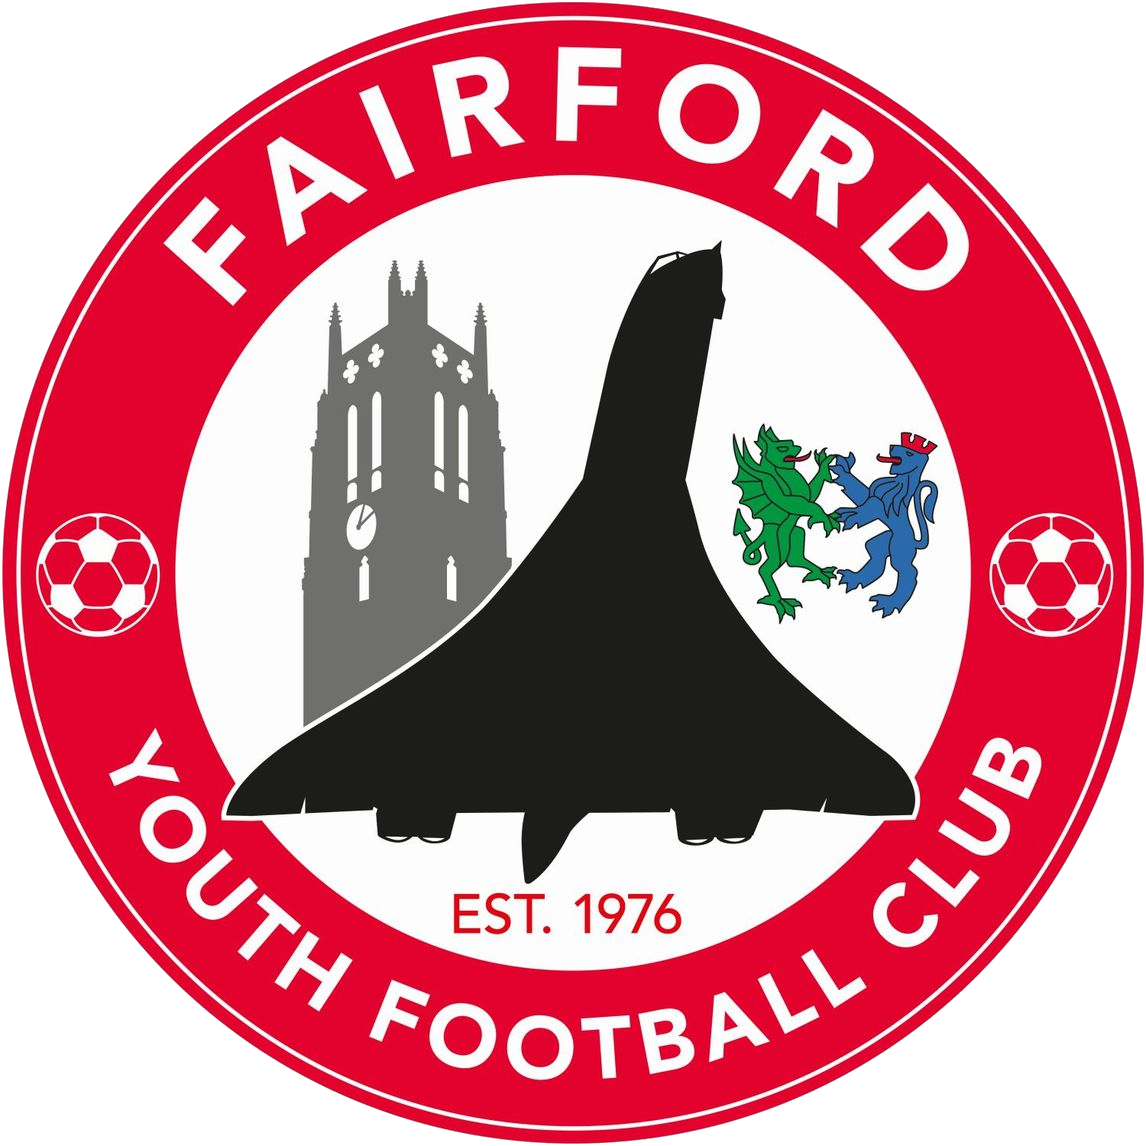 Fairford Youth FC